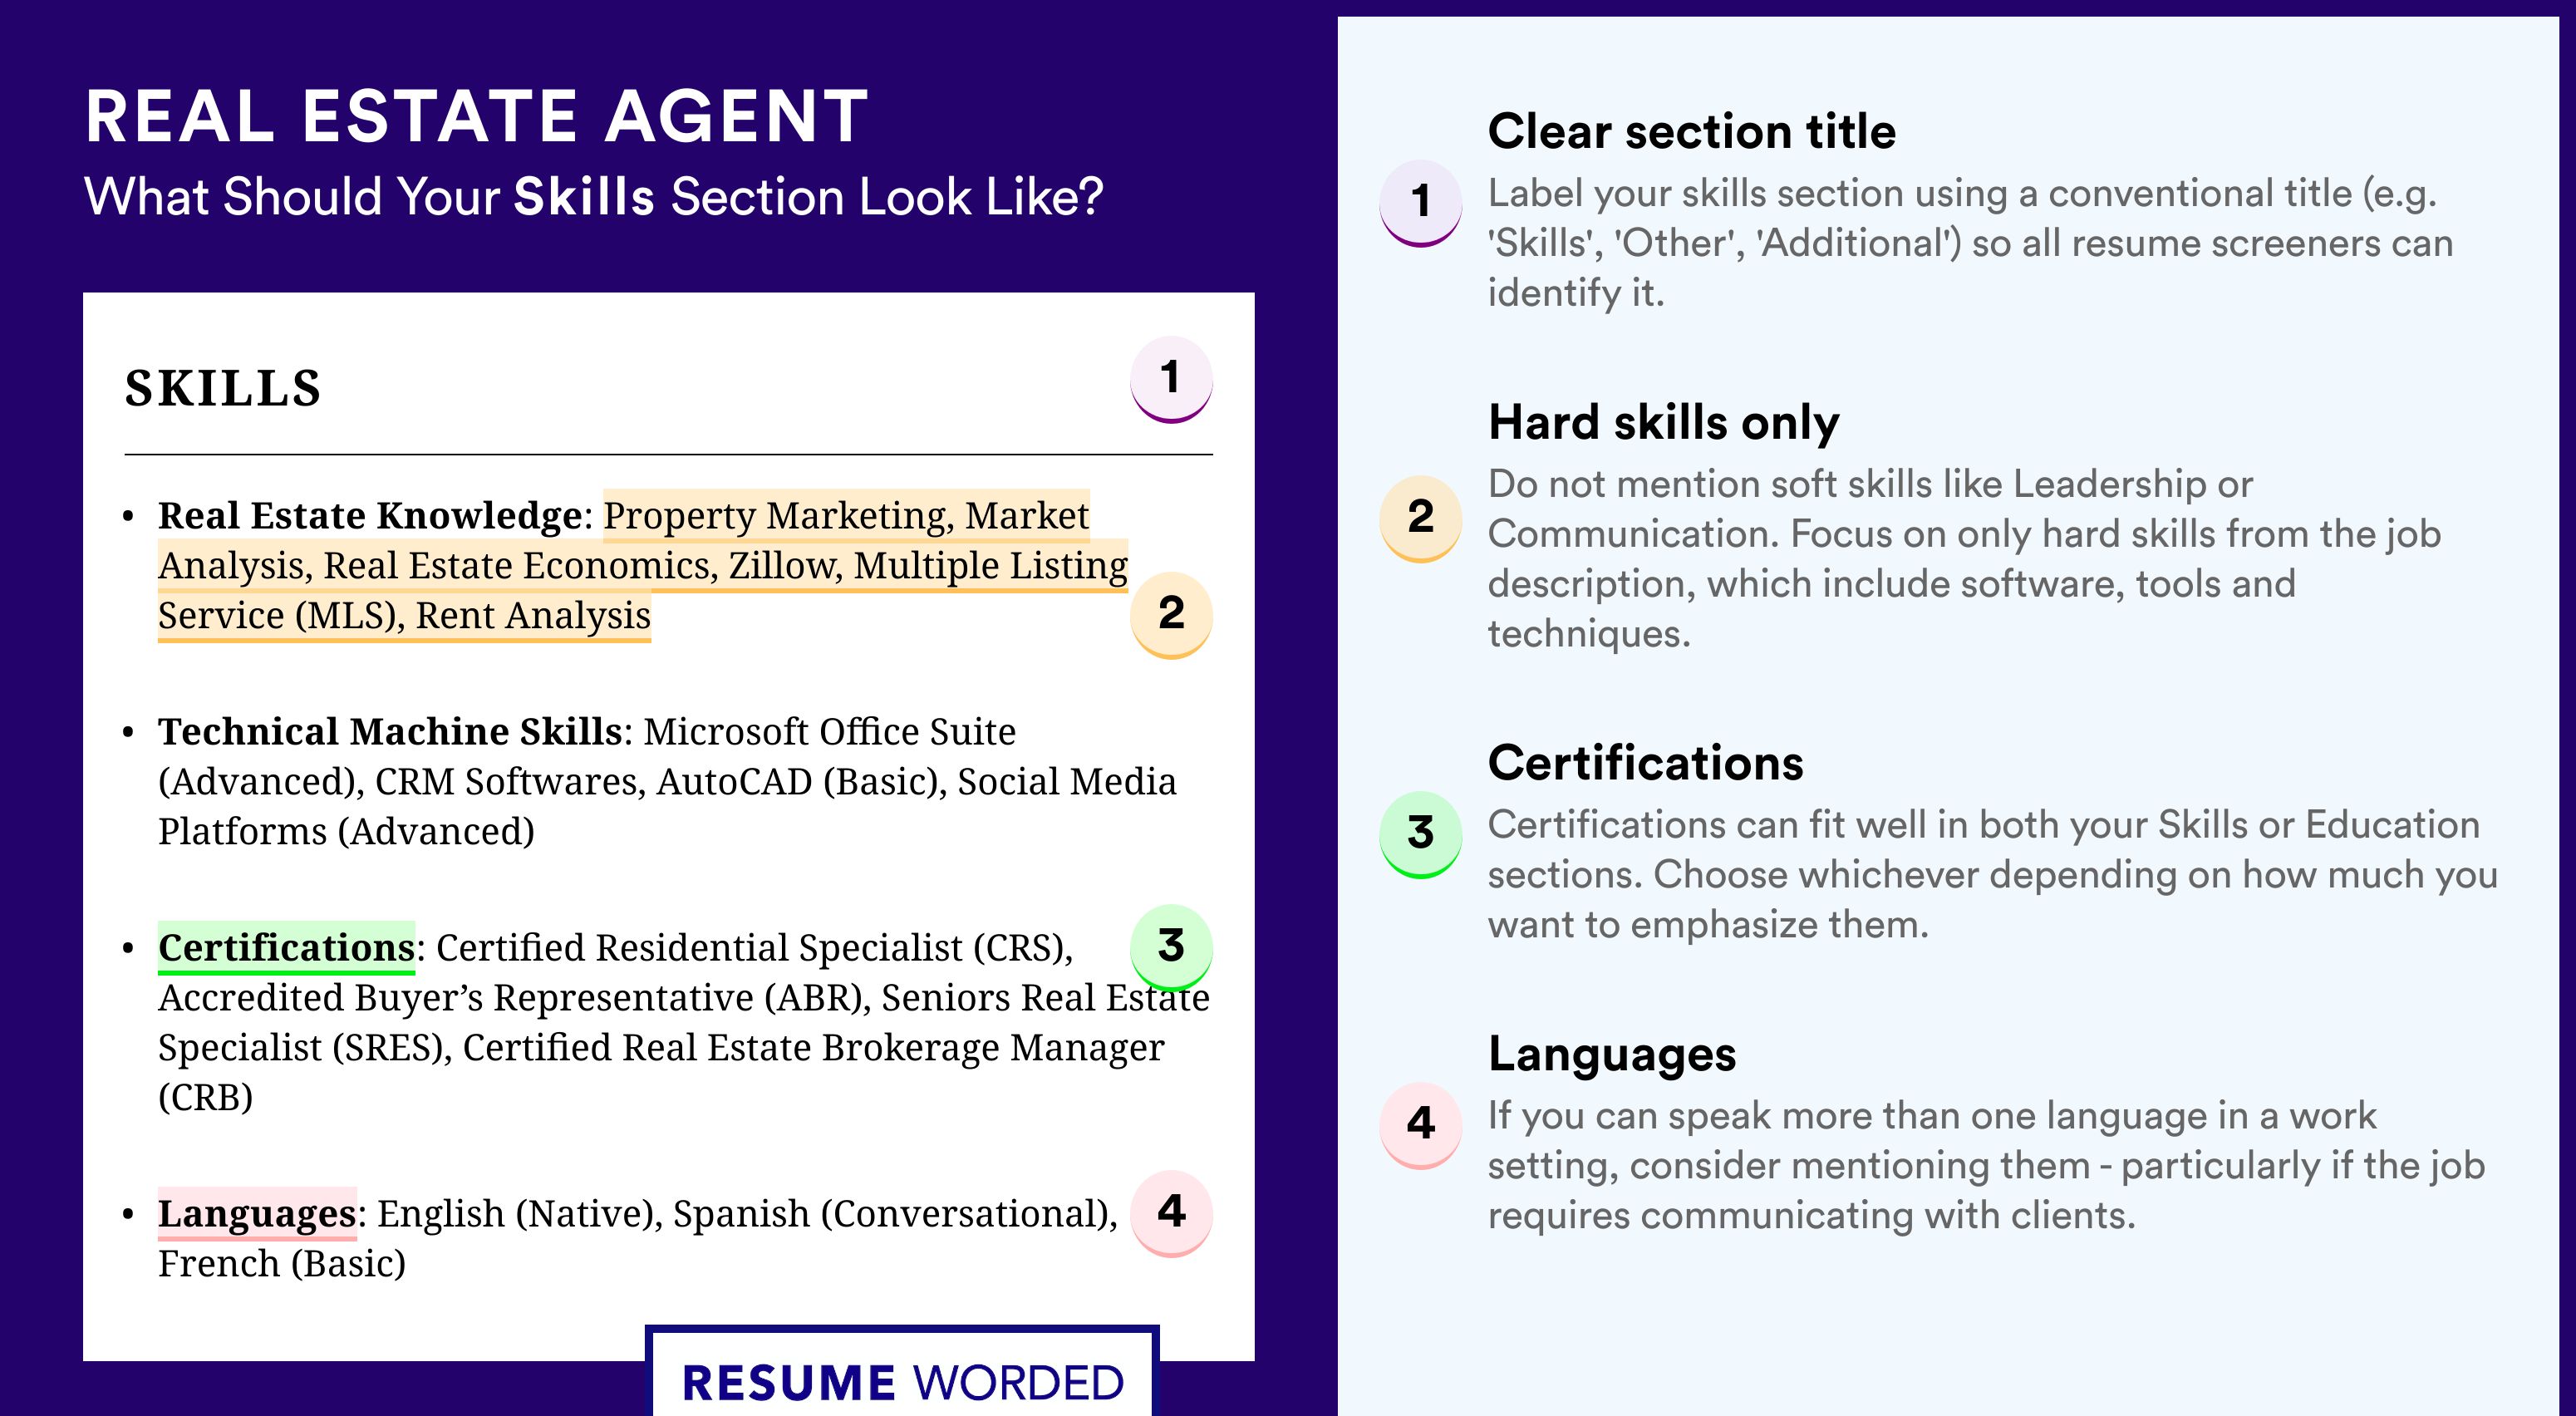 How To Write Your Skills Section - Real Estate Agent Roles